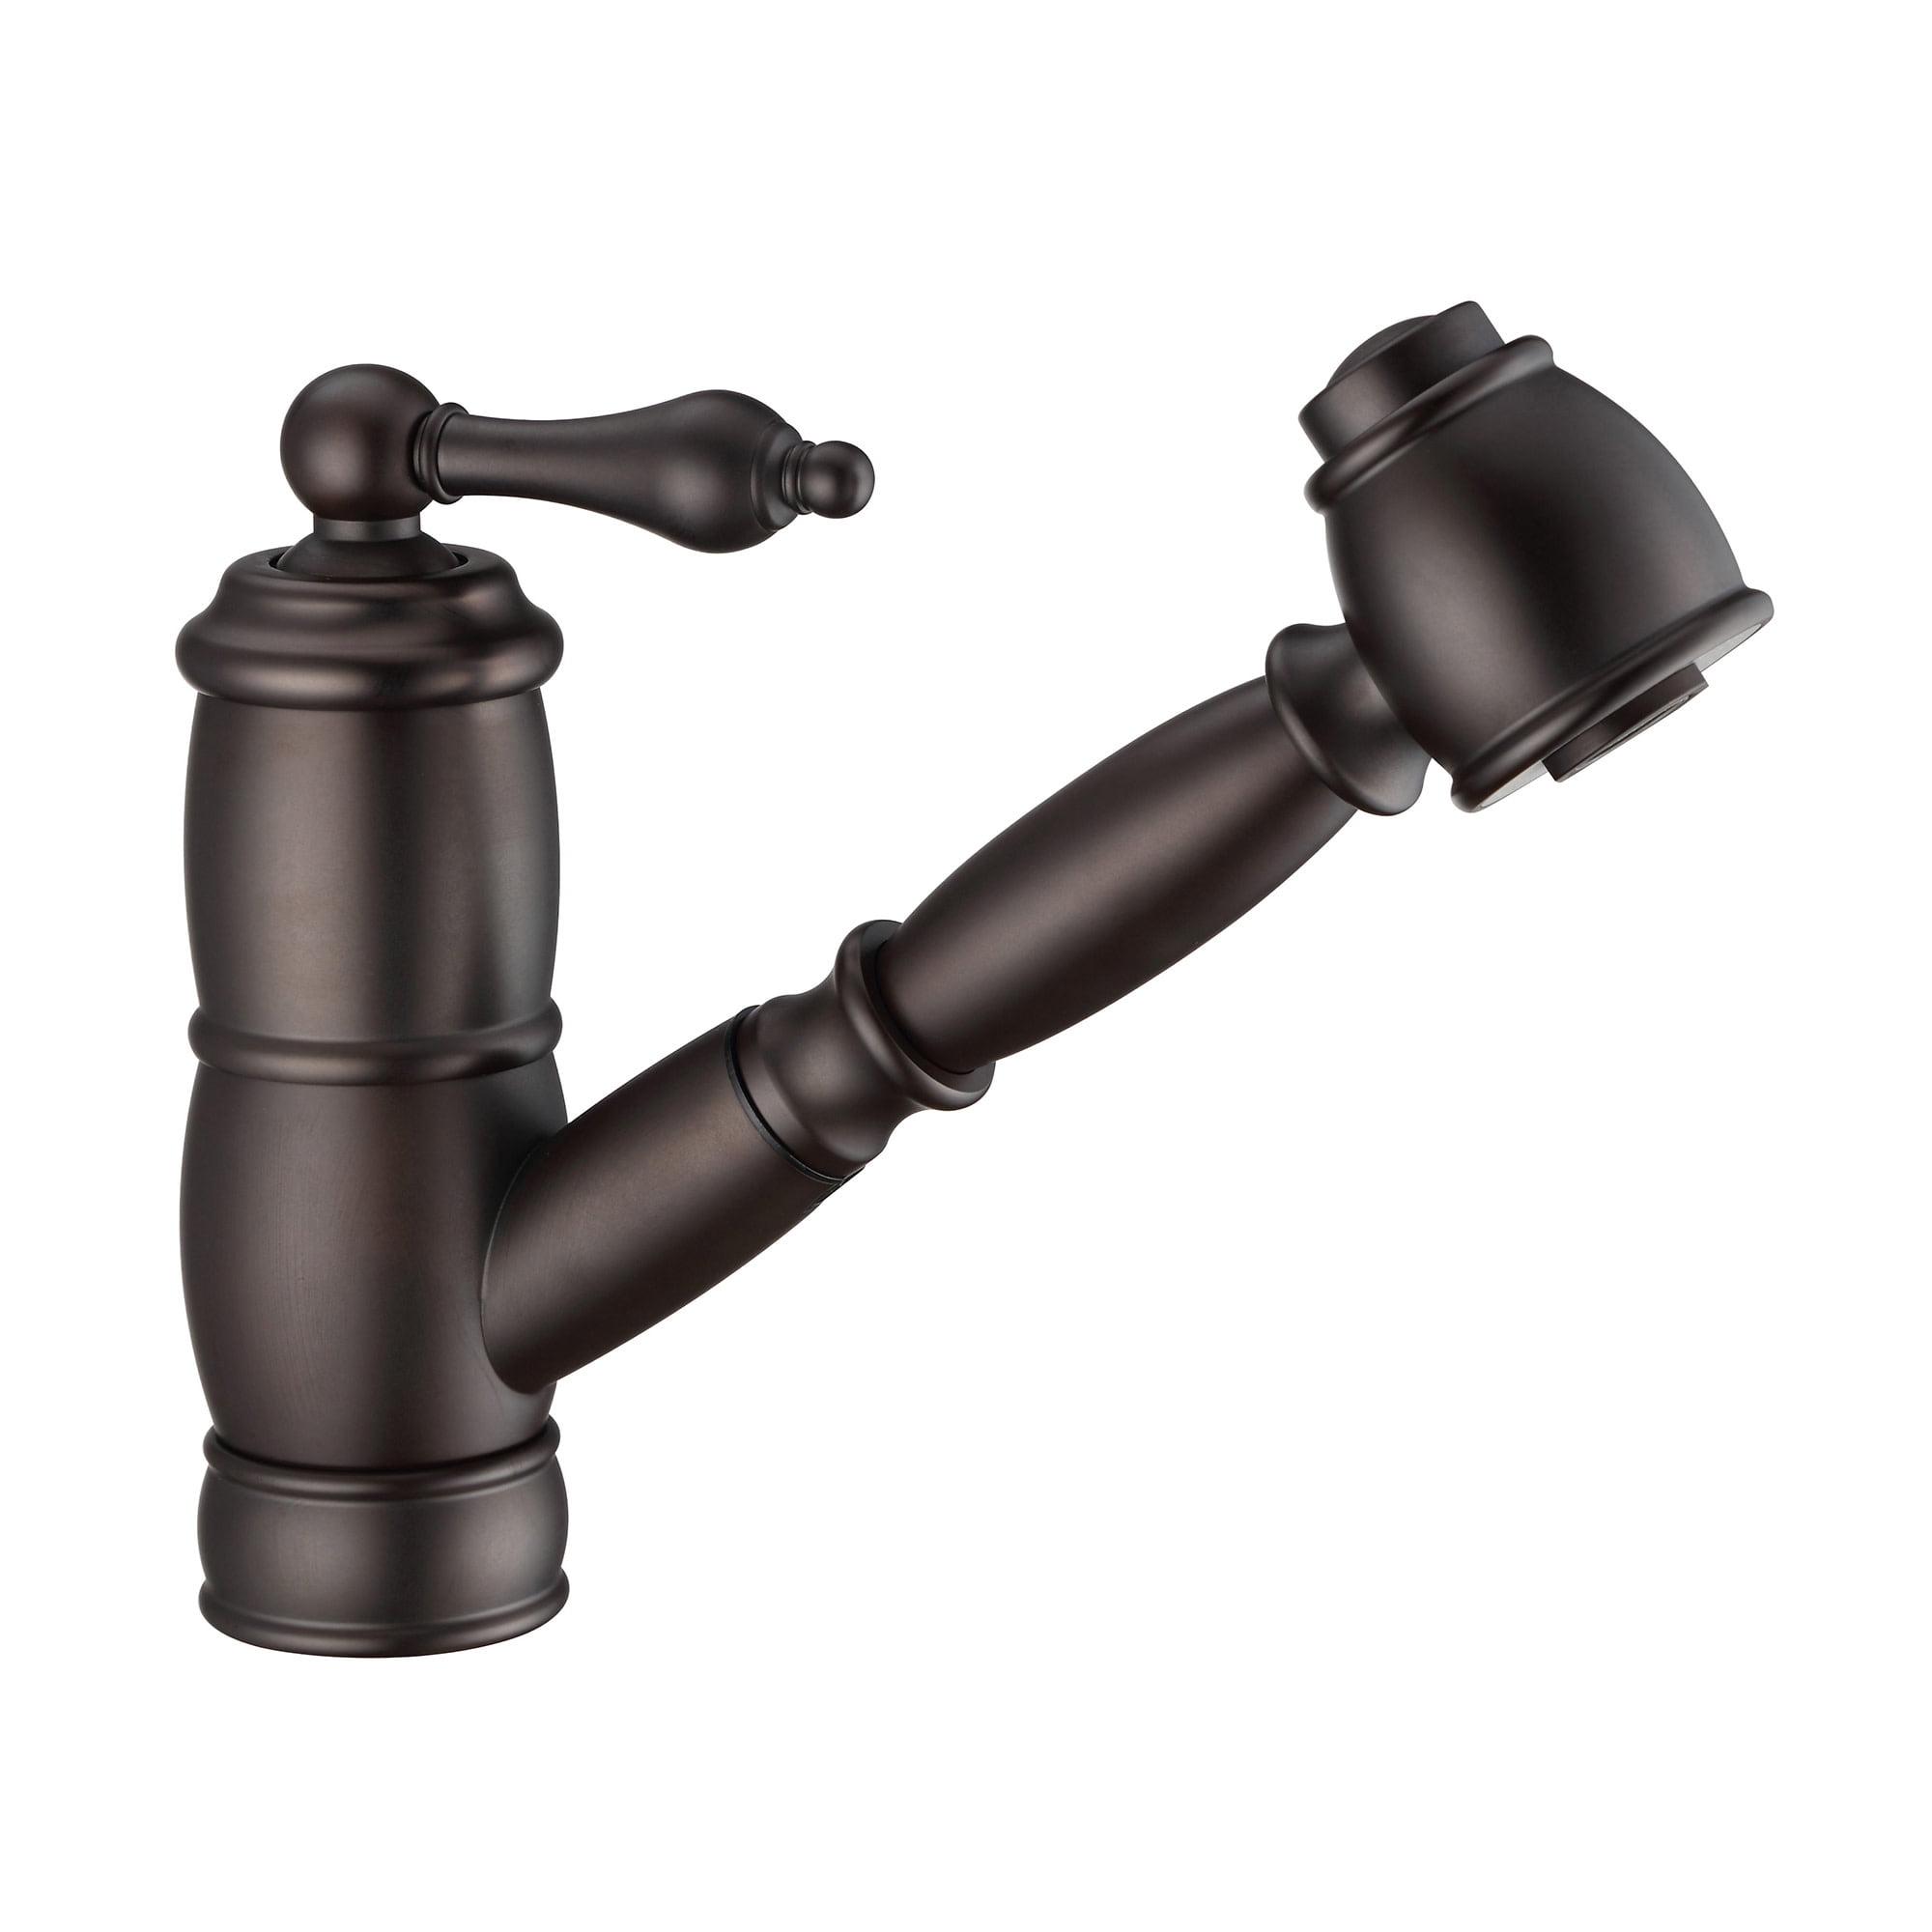 Whkpsl3-2222-nt-orb Vintage Iii Plus Single Hole & Single Lever Faucet With A Pull-out Spray Head - Oil Rubbed Bronze